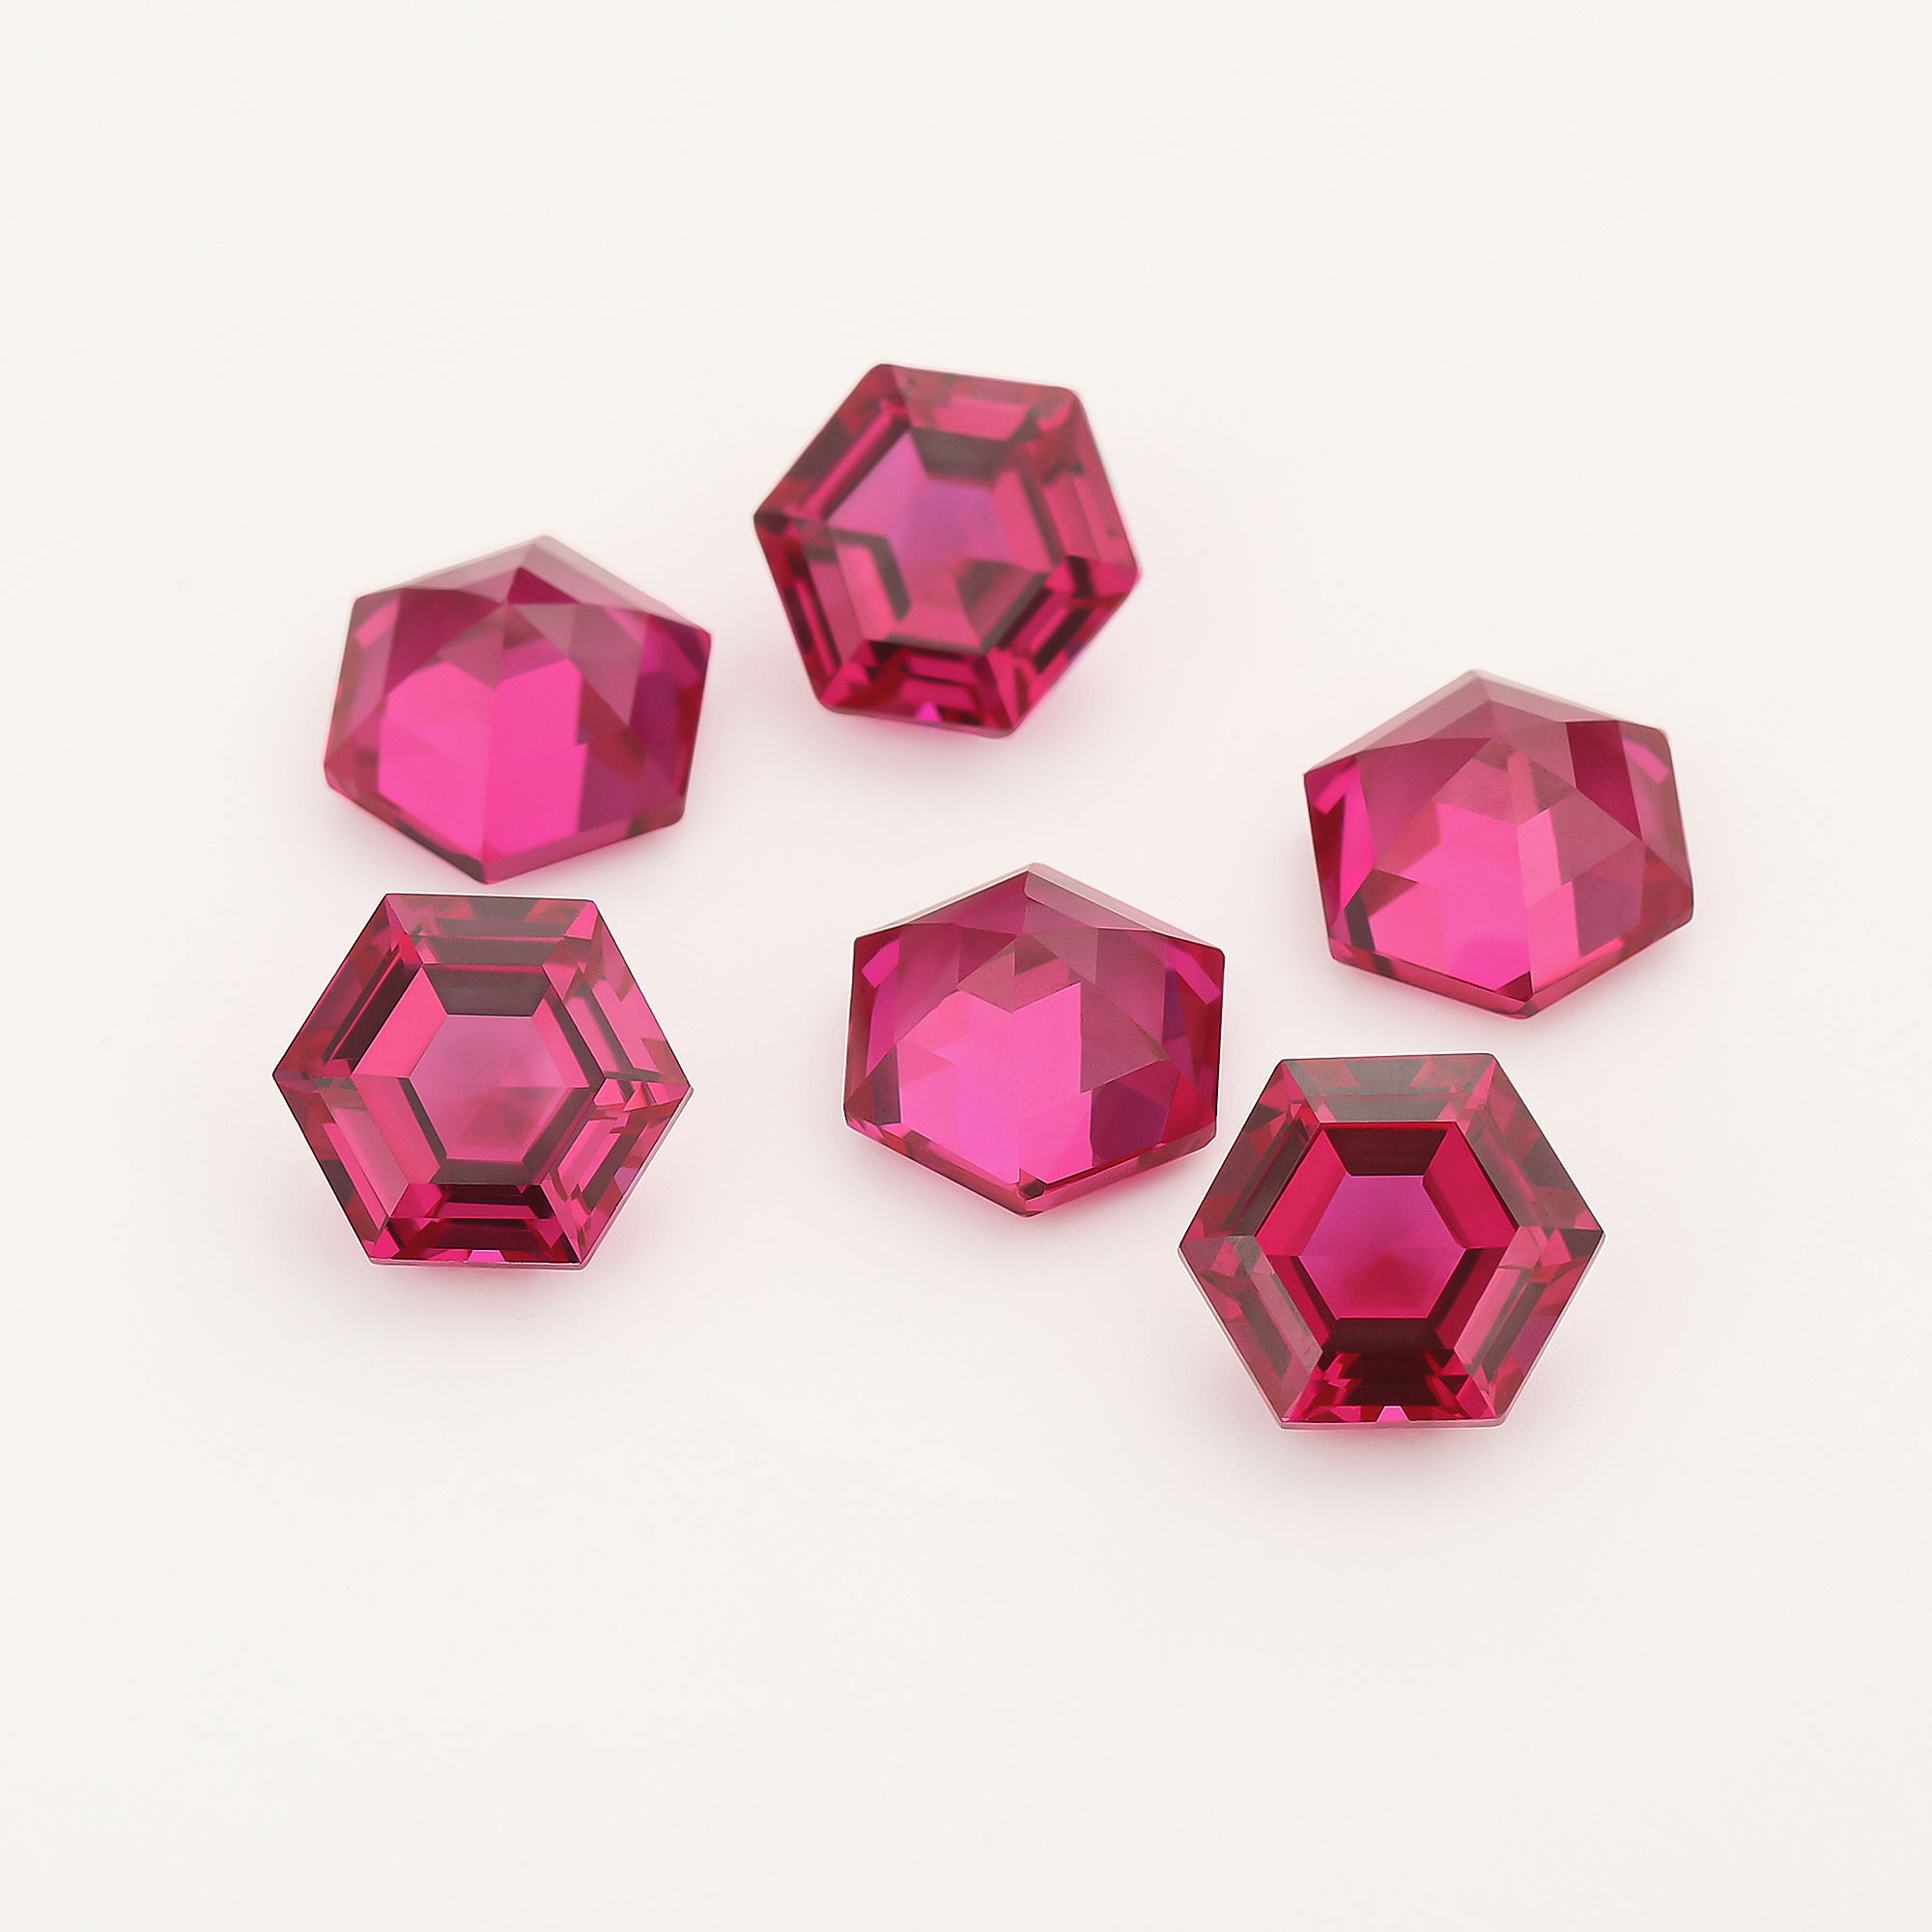 1Pcs Hexagon Cut Ruby Faceted Stone Lab Created,July Birthstone,Red Faceted Loose Gemstone,DIY Jewelry Supplies 4160063 - Click Image to Close